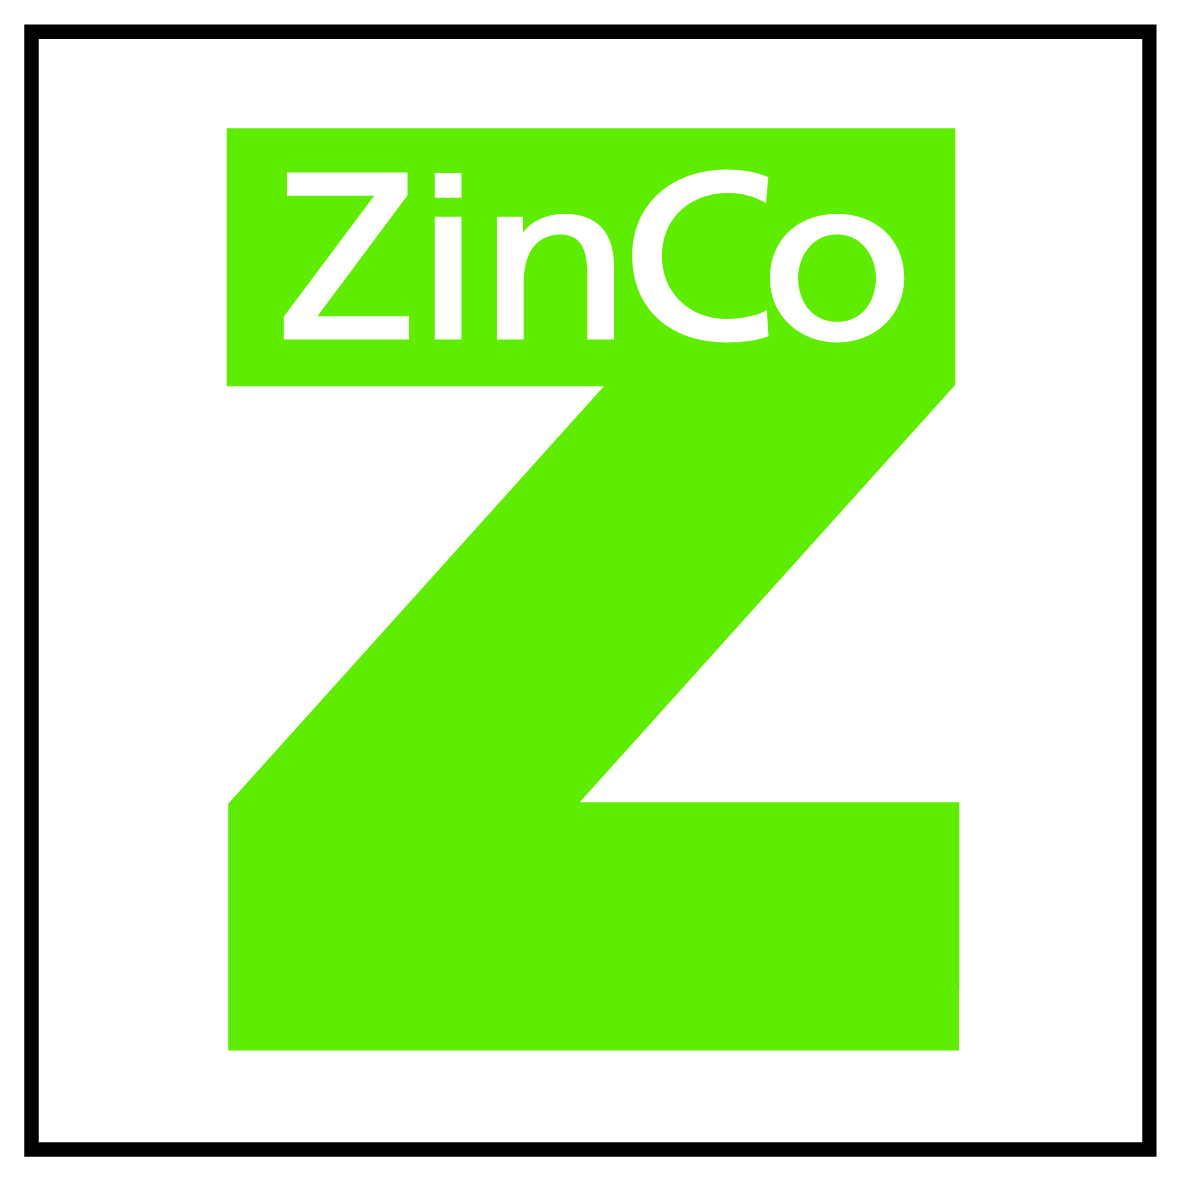 Zinco Green Roof Systems Ltd